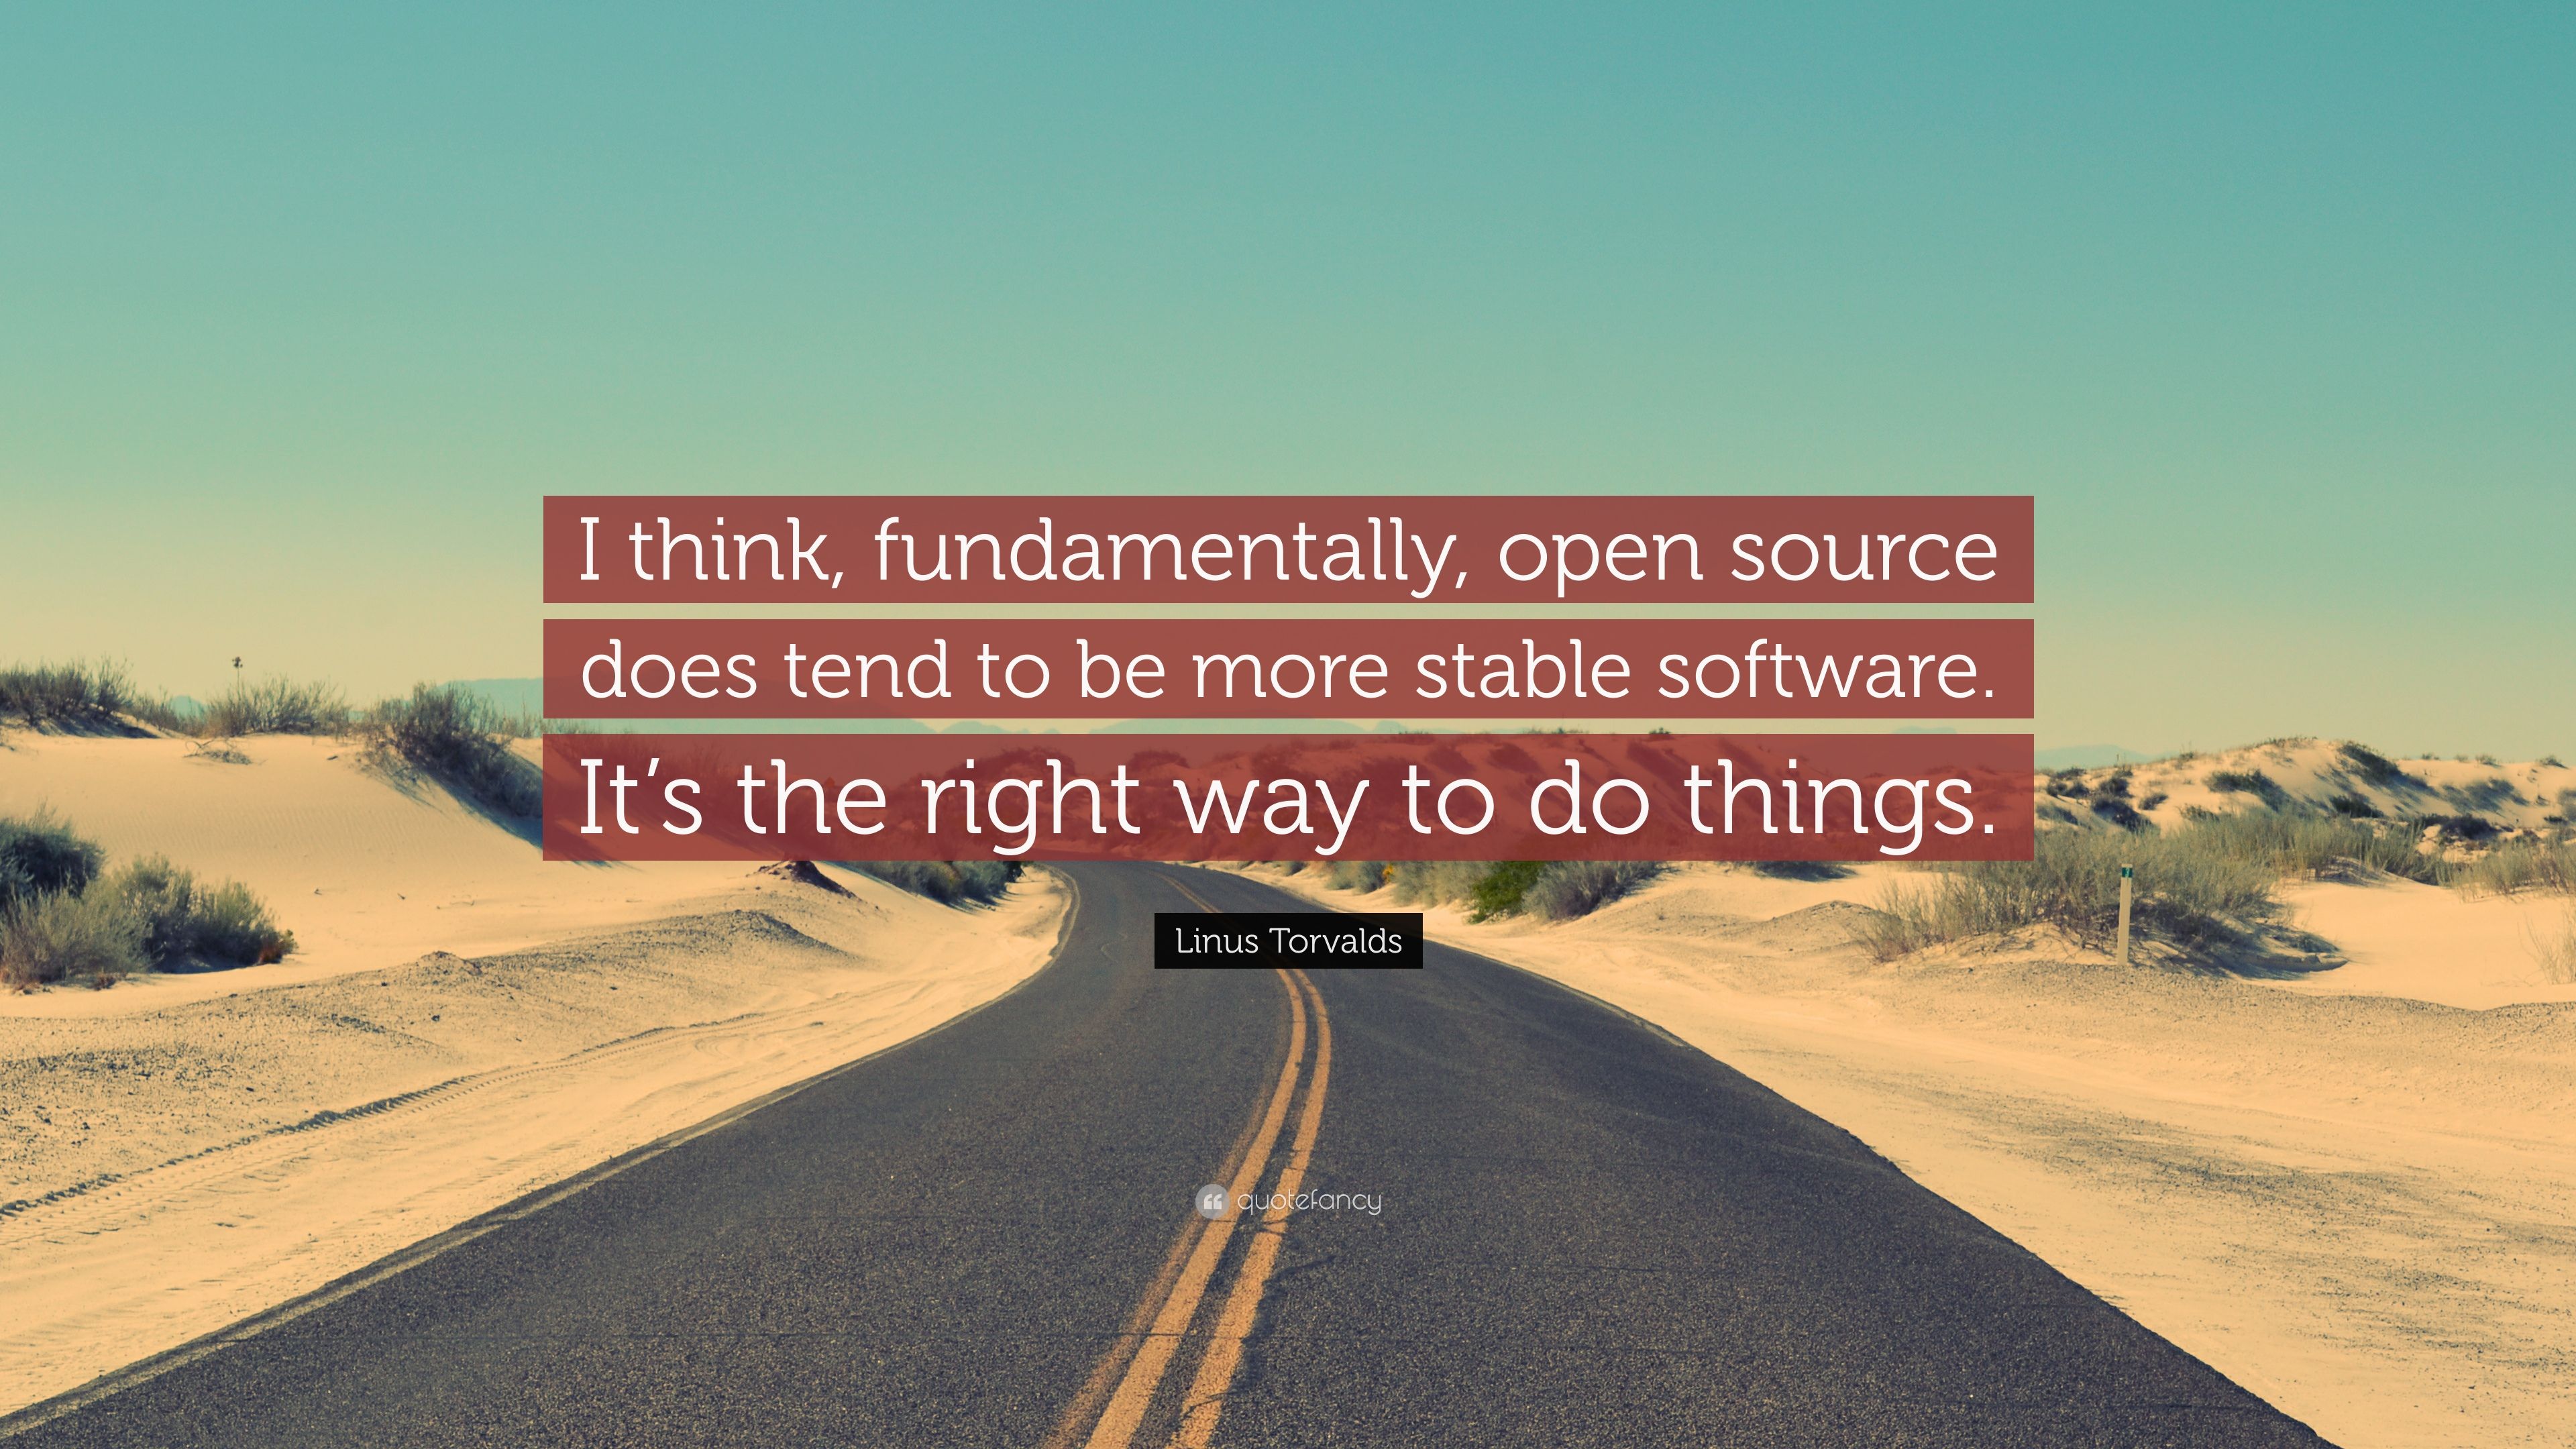 Linus Torvalds Quote: “I think, fundamentally, open source does tend to be more stable software. It's the right way to do things.” (9 wallpaper)